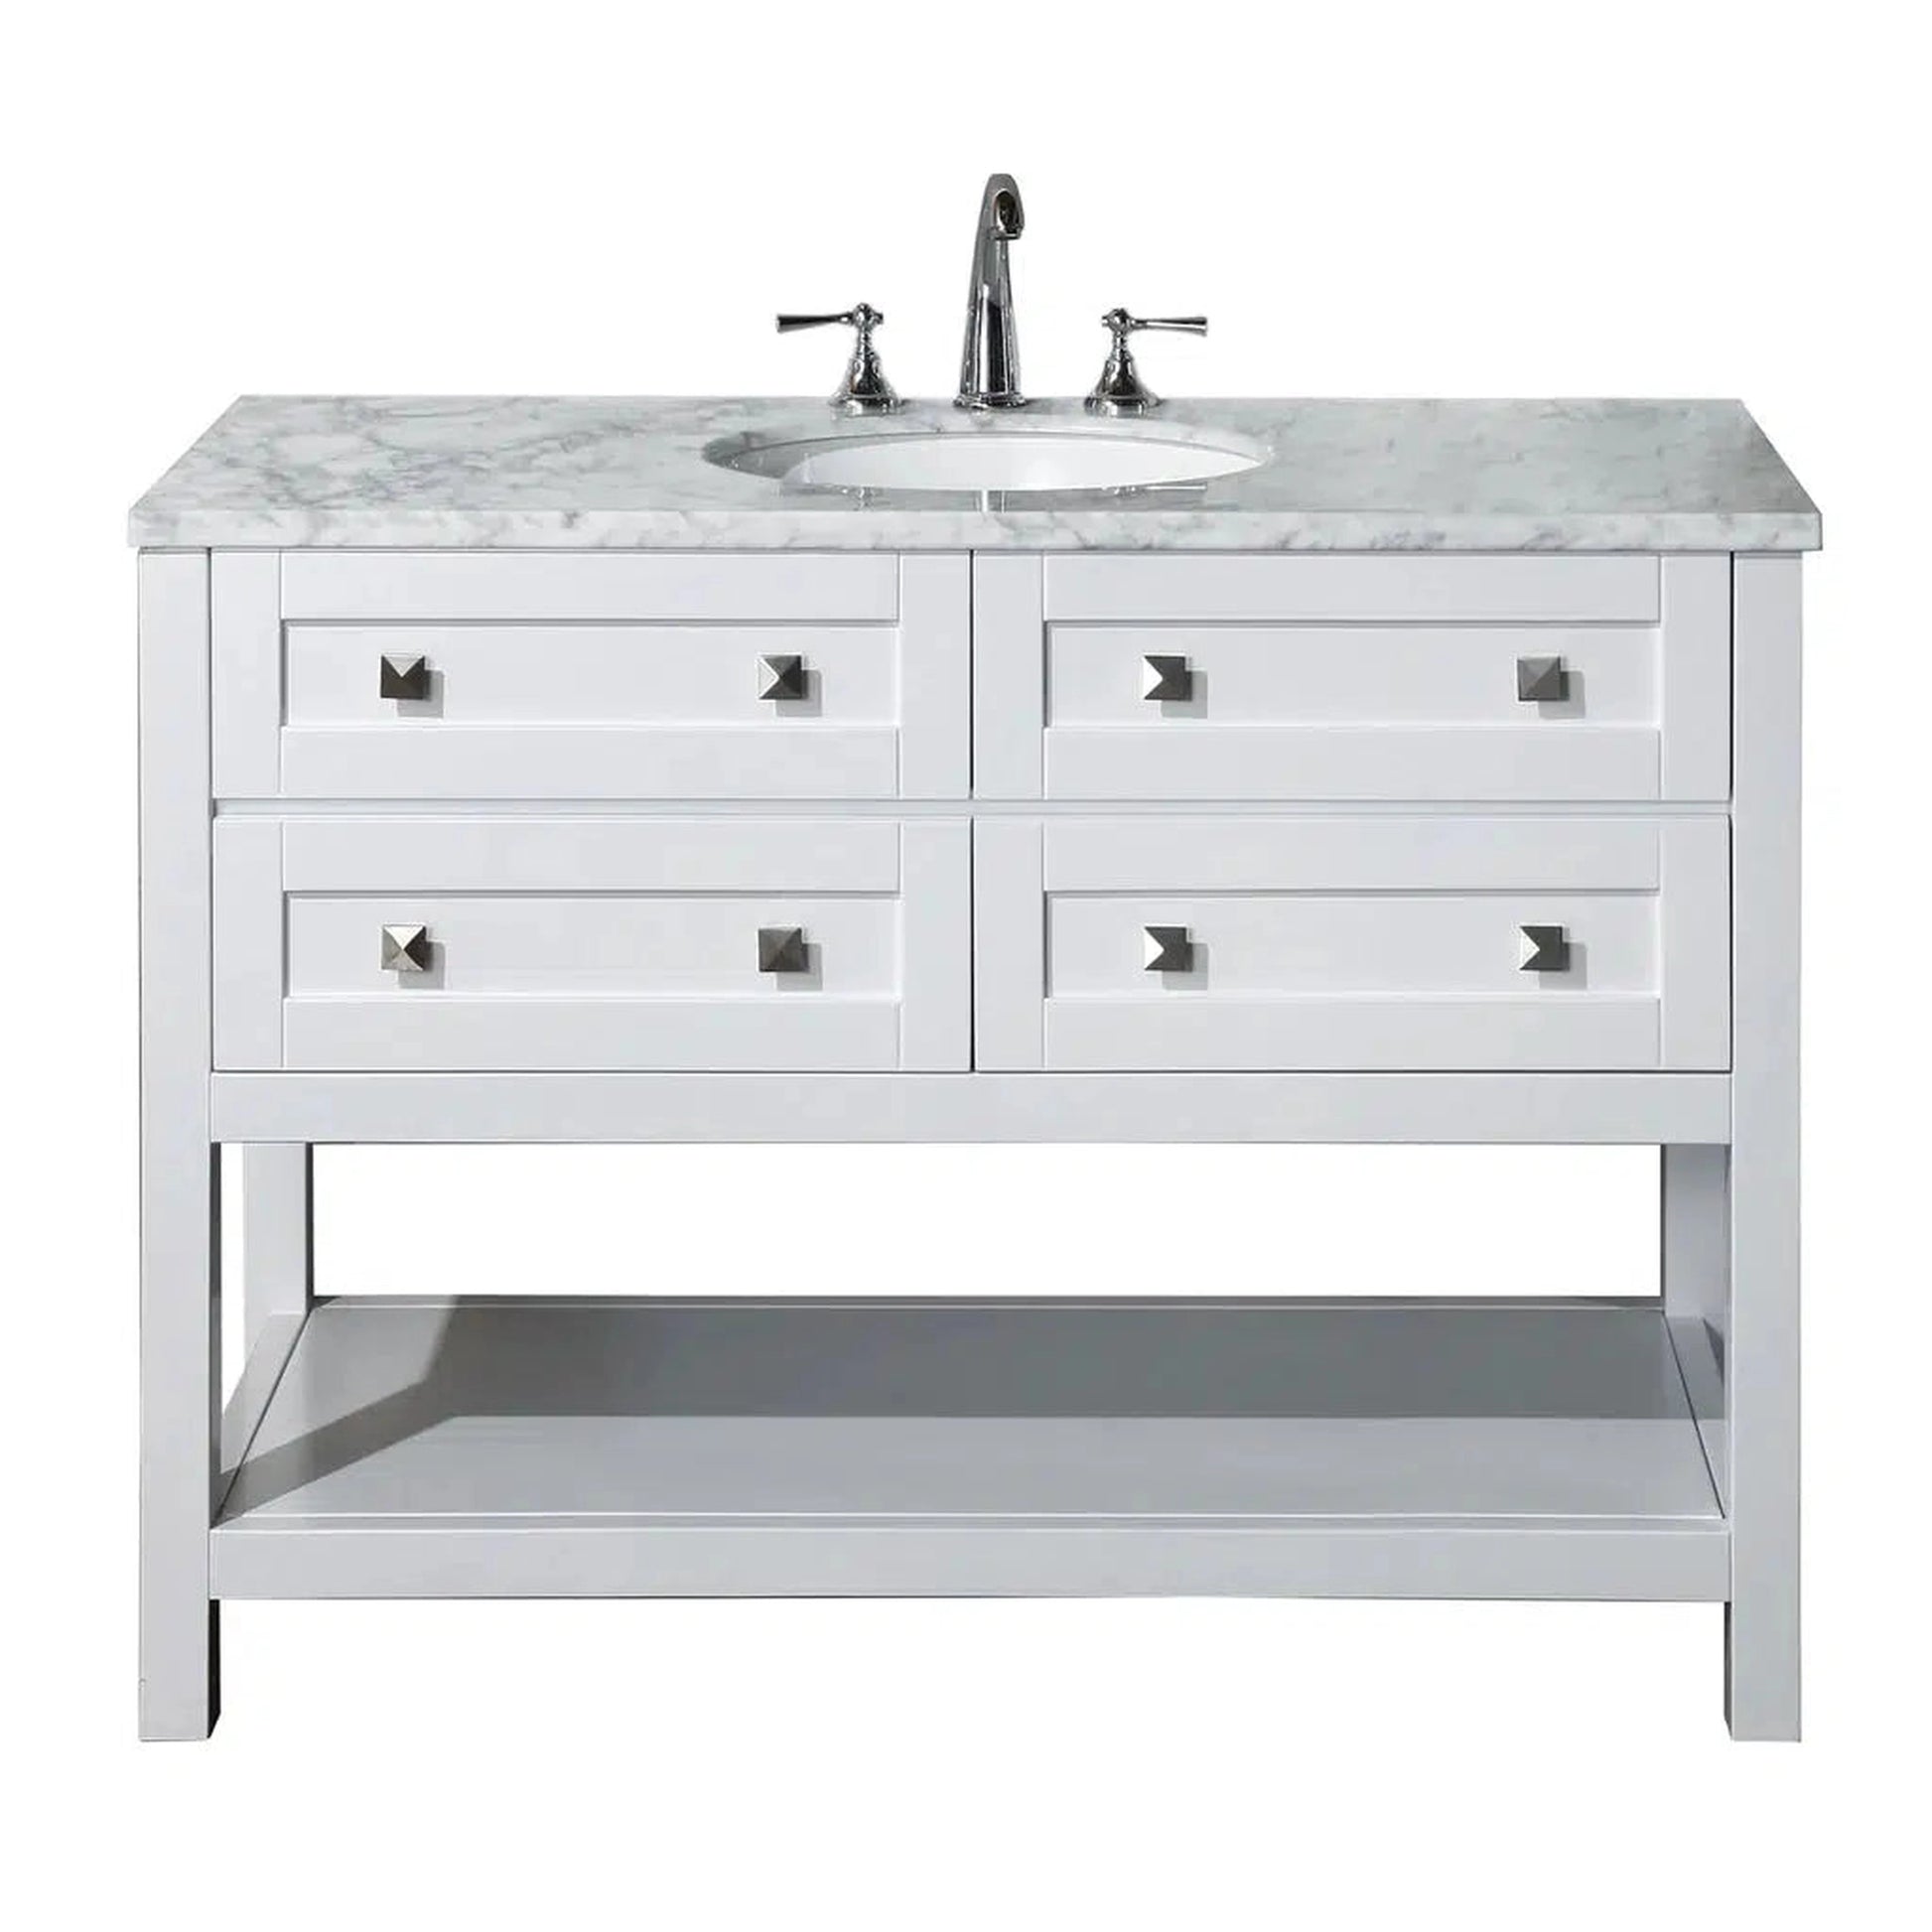 Stufurhome Marla 48" White Freestanding Bathroom Vanity With Oval Single Sink, Carrara White Marble Top, 4 Functional Drawers and Widespread Faucet Holes